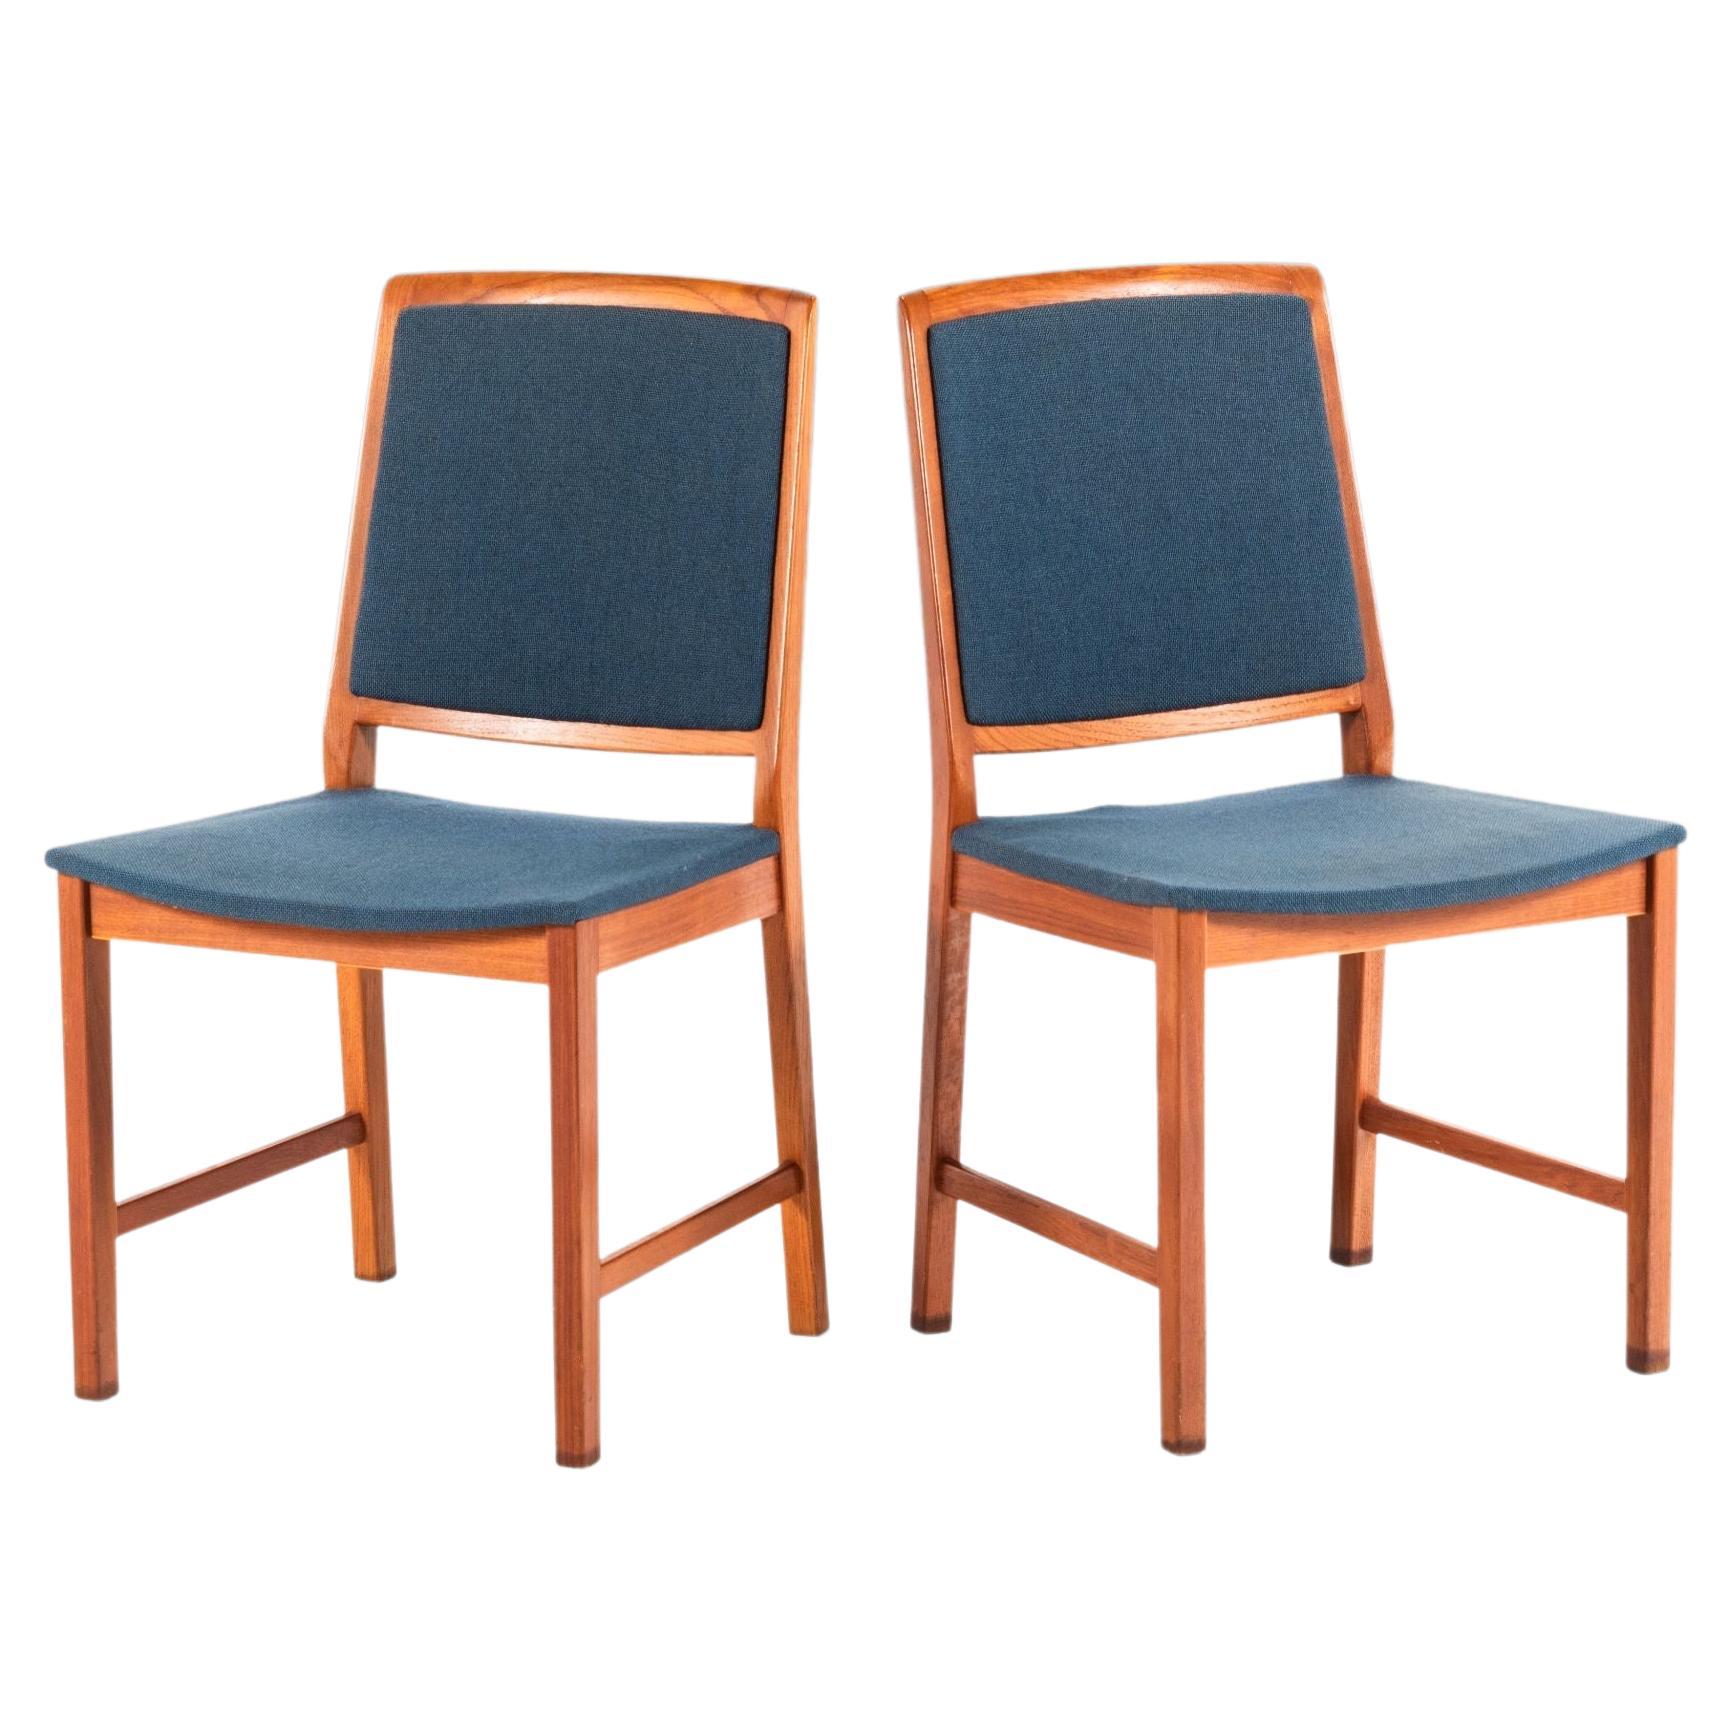 Set of 2 Side Chairs / Dining Chairs in Teak for Skaraborgs Sweden, c. 1960's For Sale